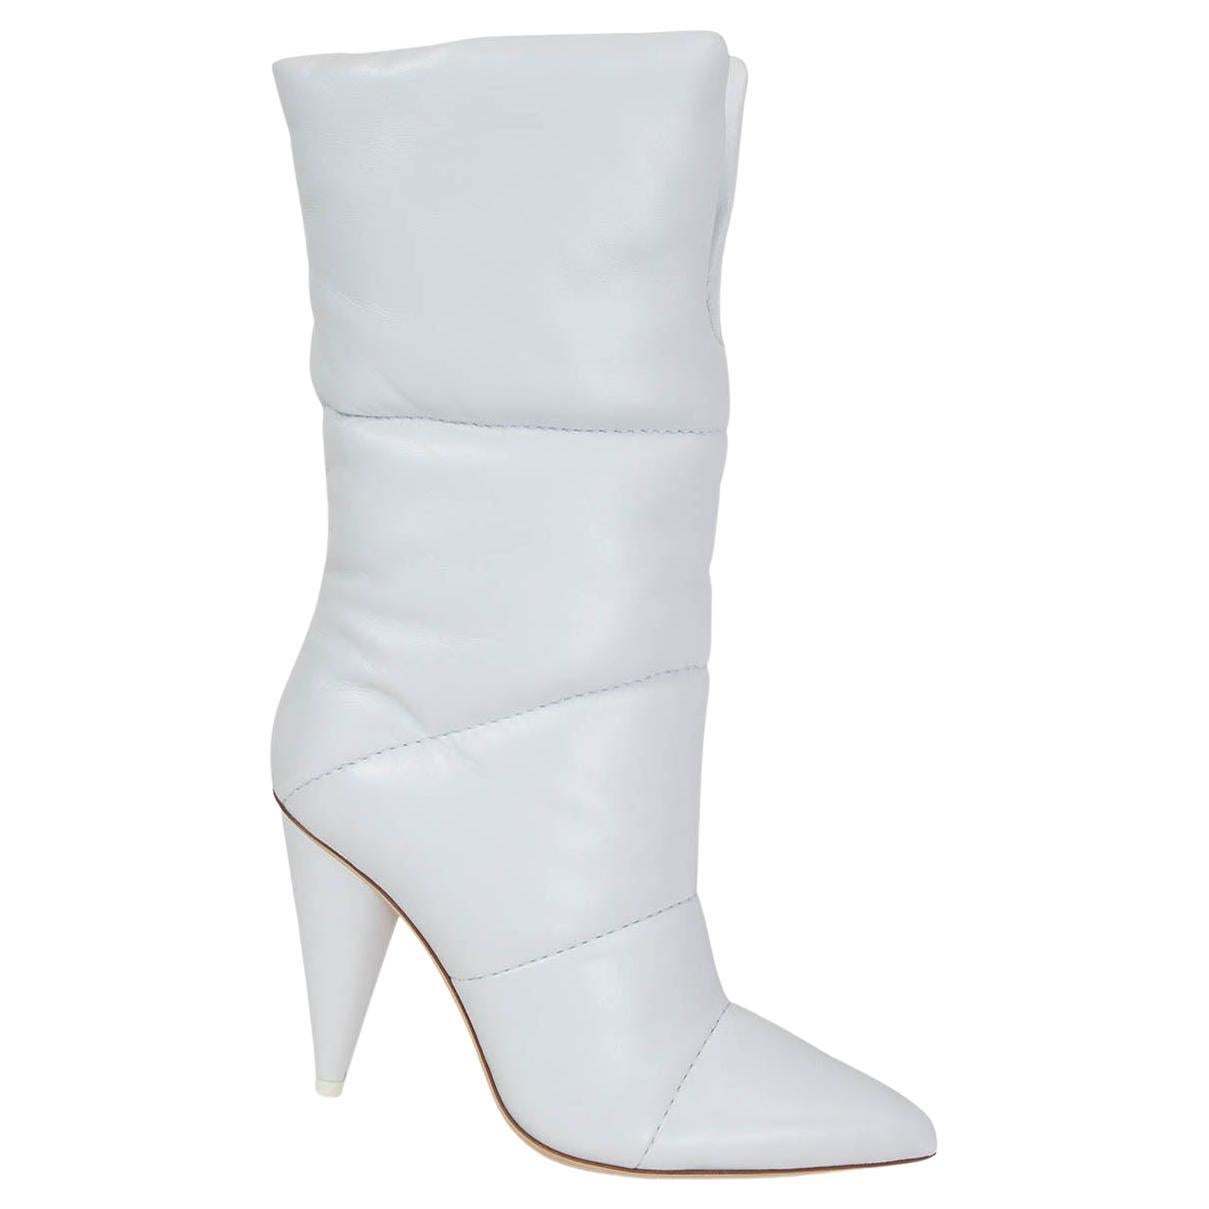 OFF-WHITE x JIMMY CHOO white quilted leather SARA 100 Boots Shoes 37 For Sale